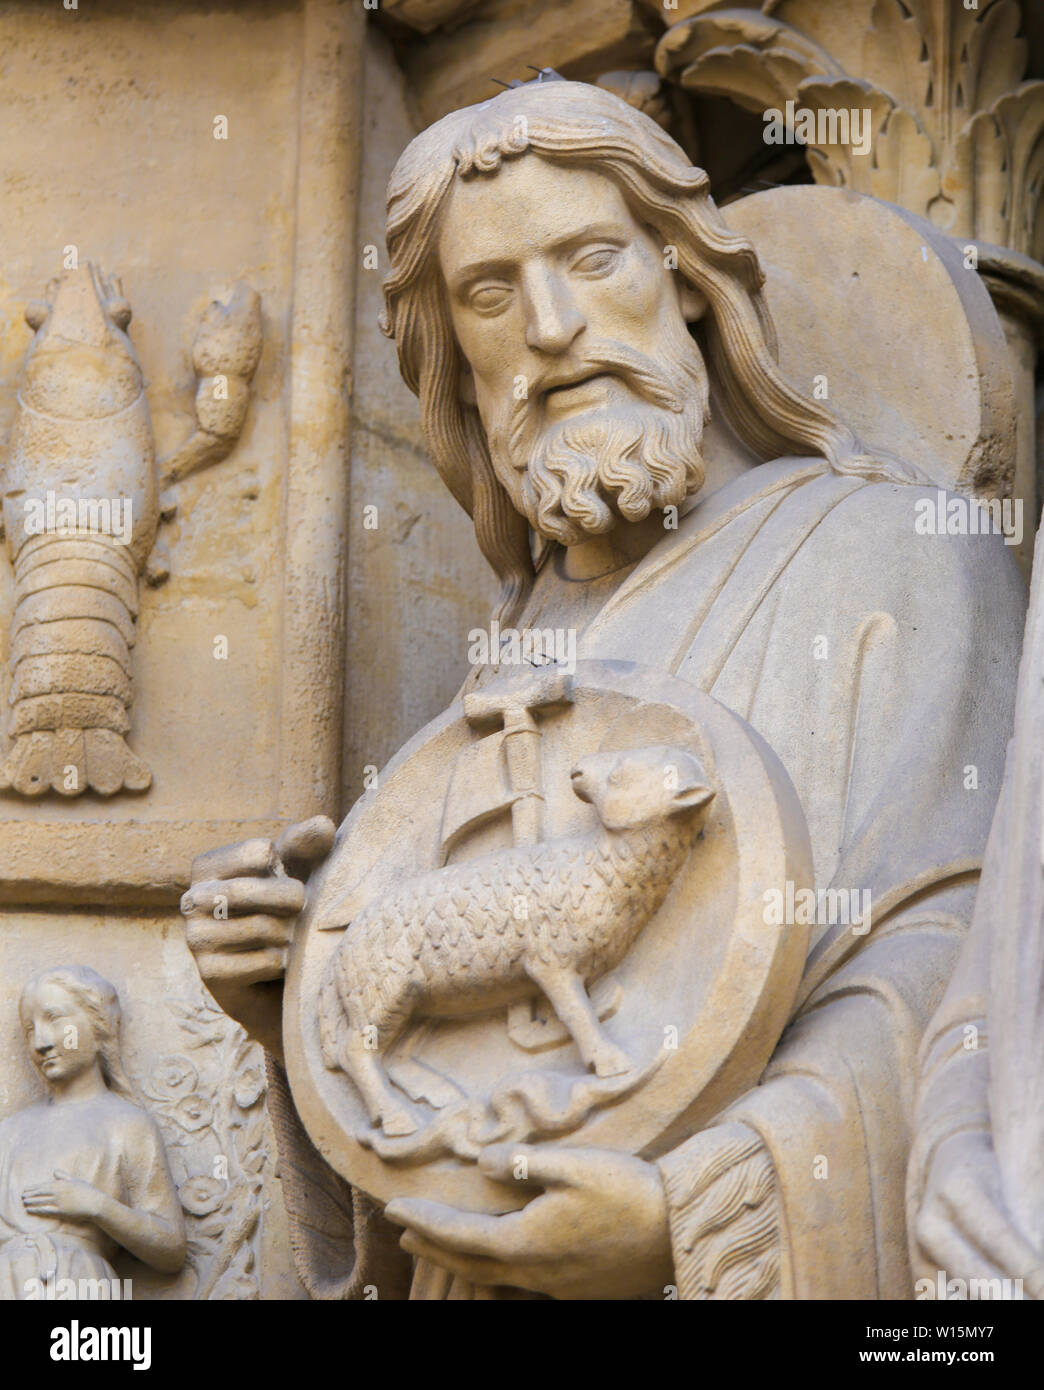 Medieval Statue of Saint John the Baptist at the Cathedral of Notre Dame, Paris, France. Stock Photo